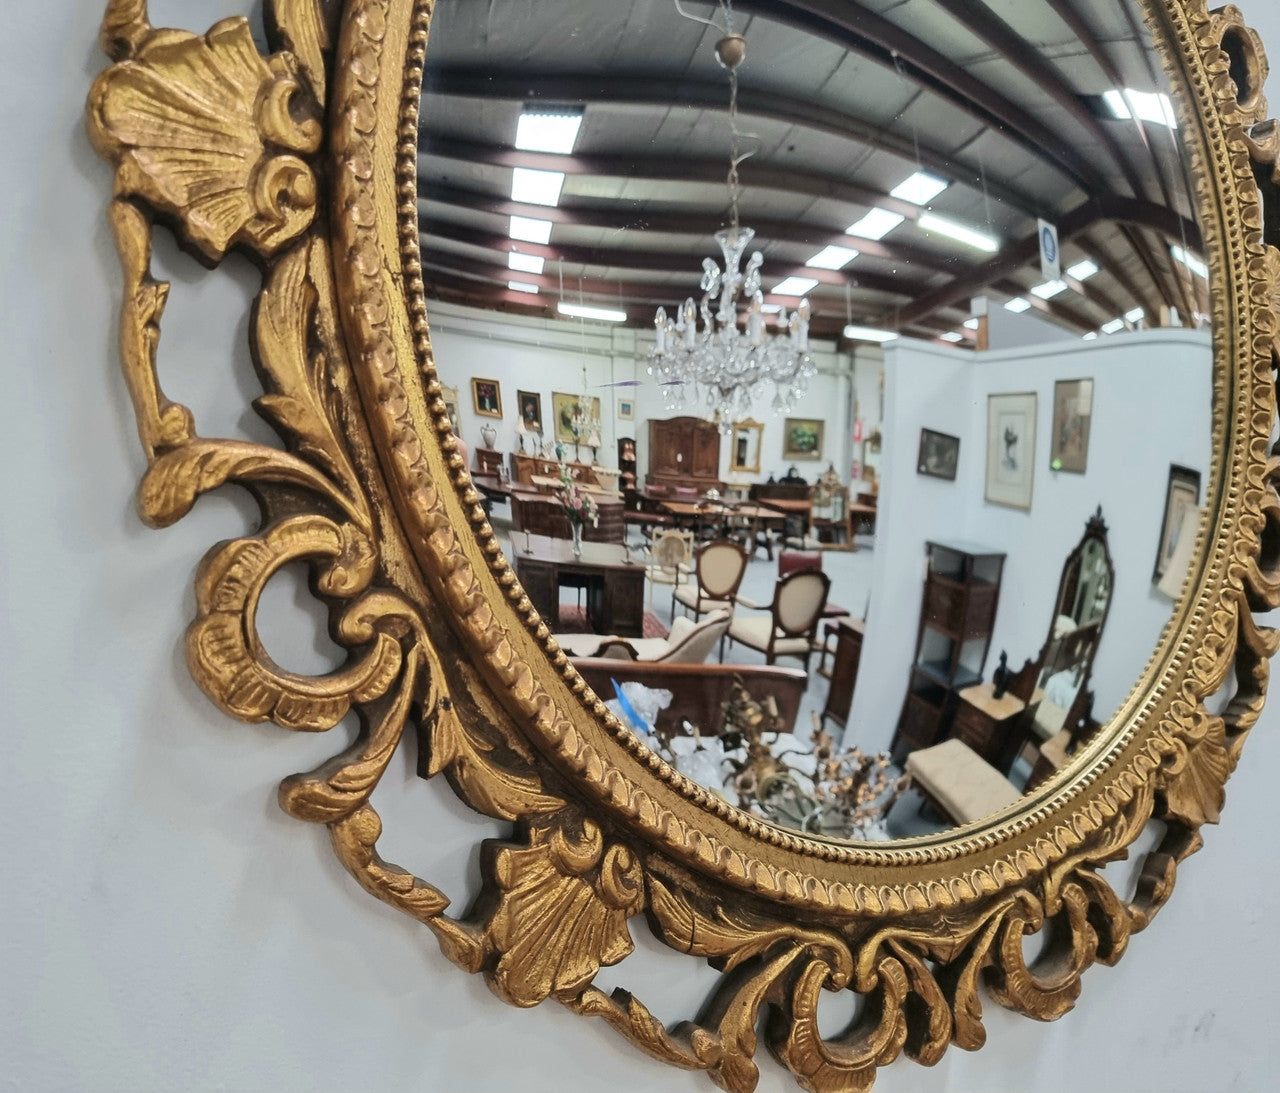 Large round convex mirror in a decorative carved wood gilt frame. In good original detailed condition.